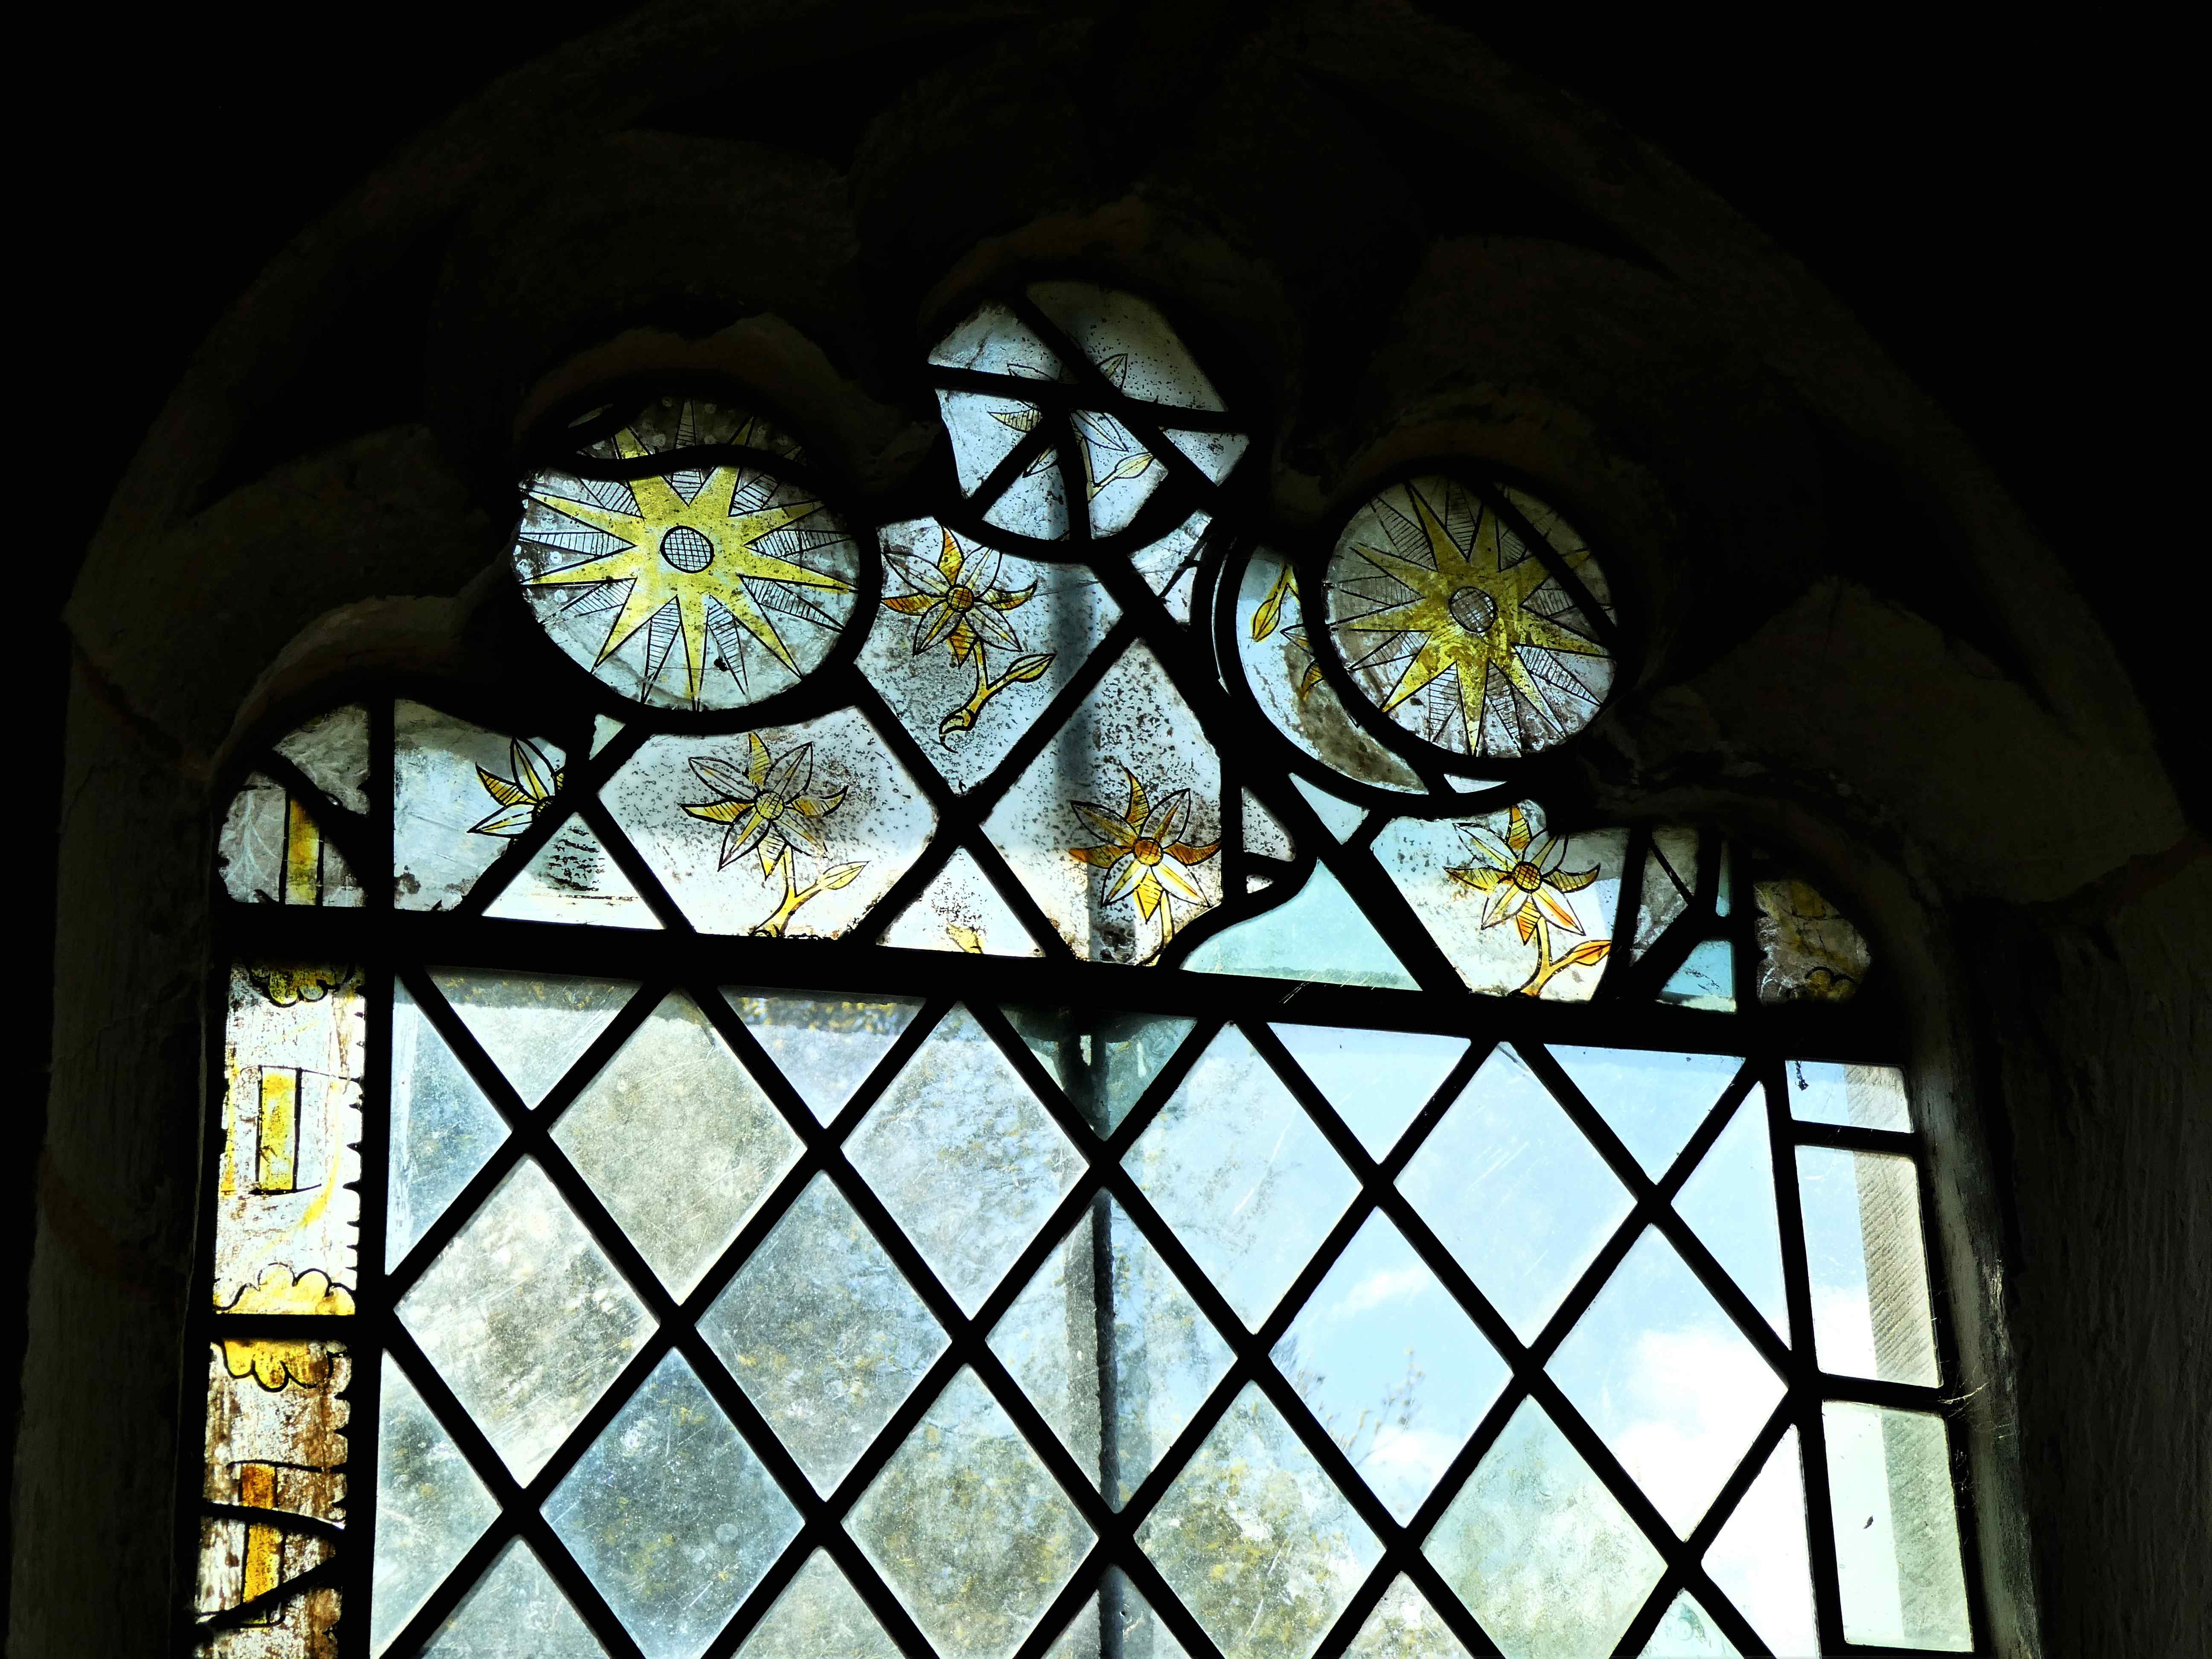 A close-up image showing a sanctuary window with stained glass planes.